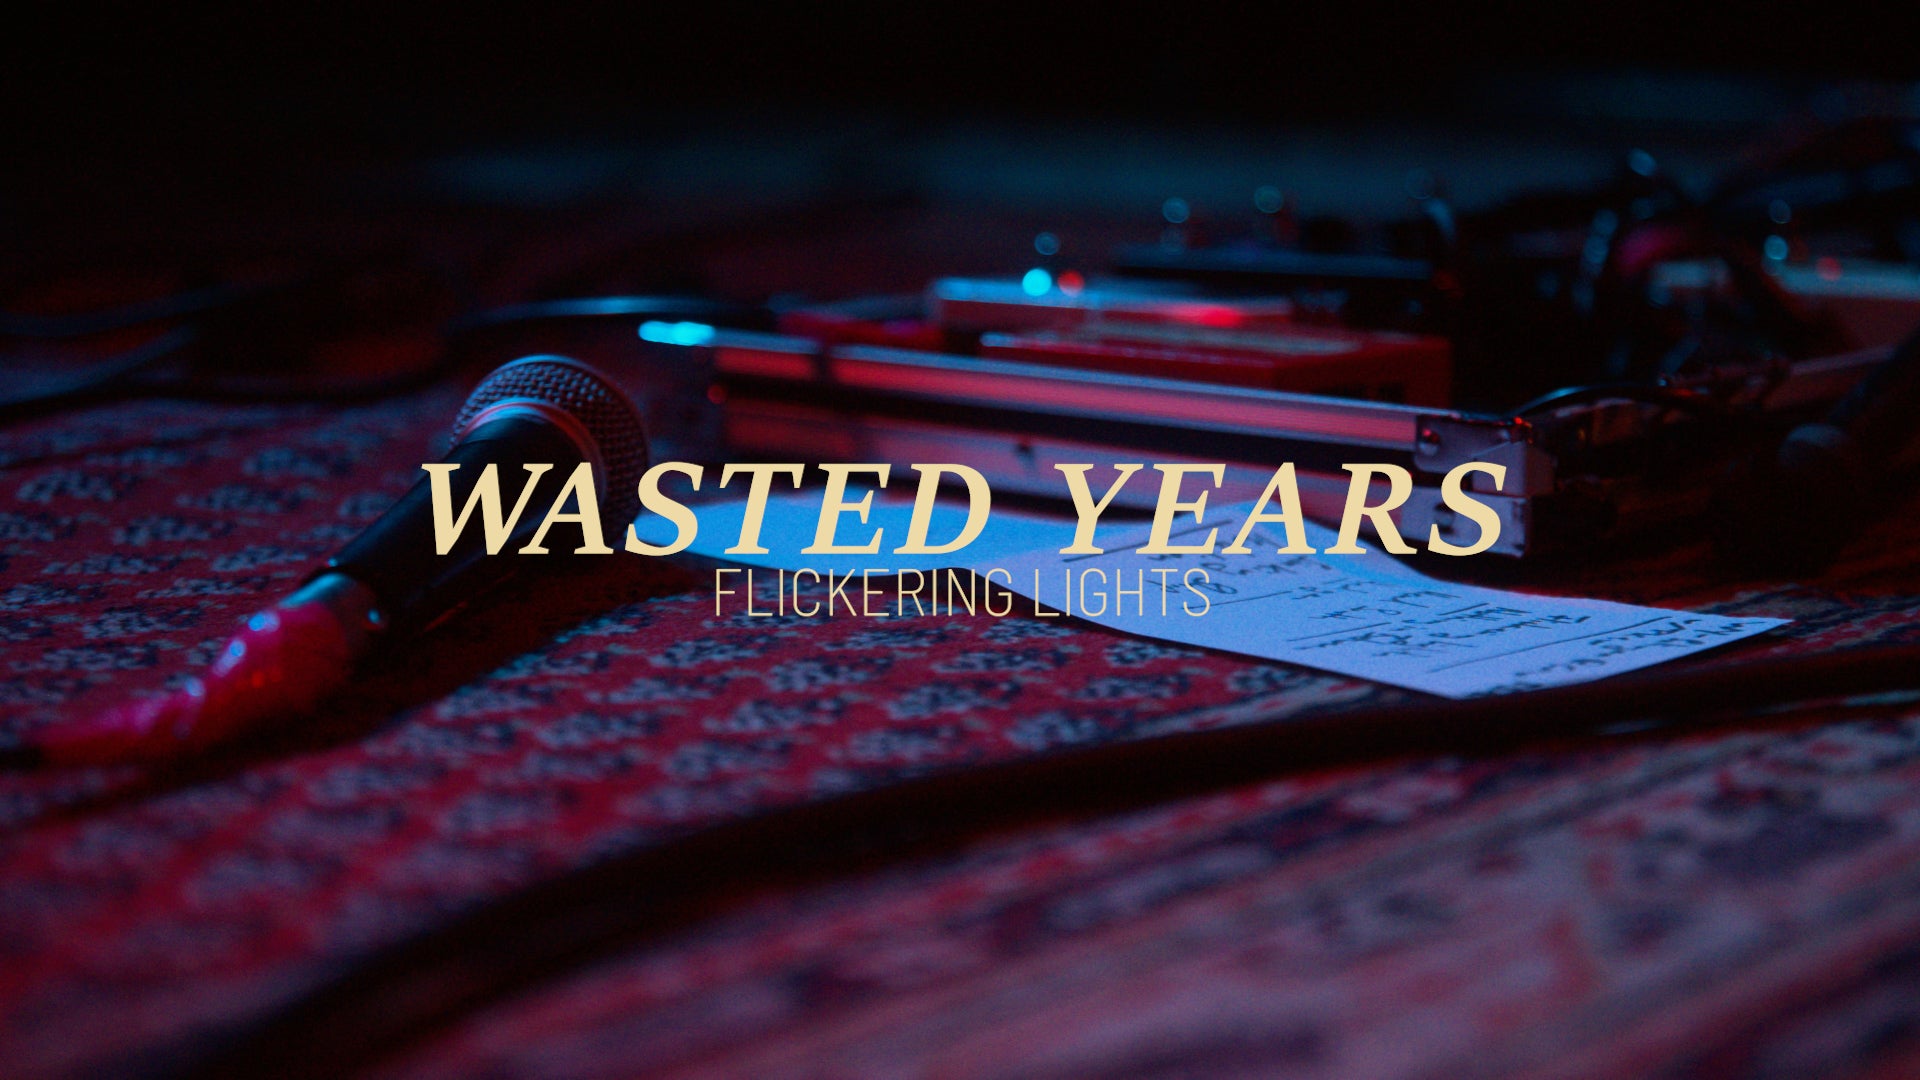 Load video: WASTED YEARS - Flickering Lights